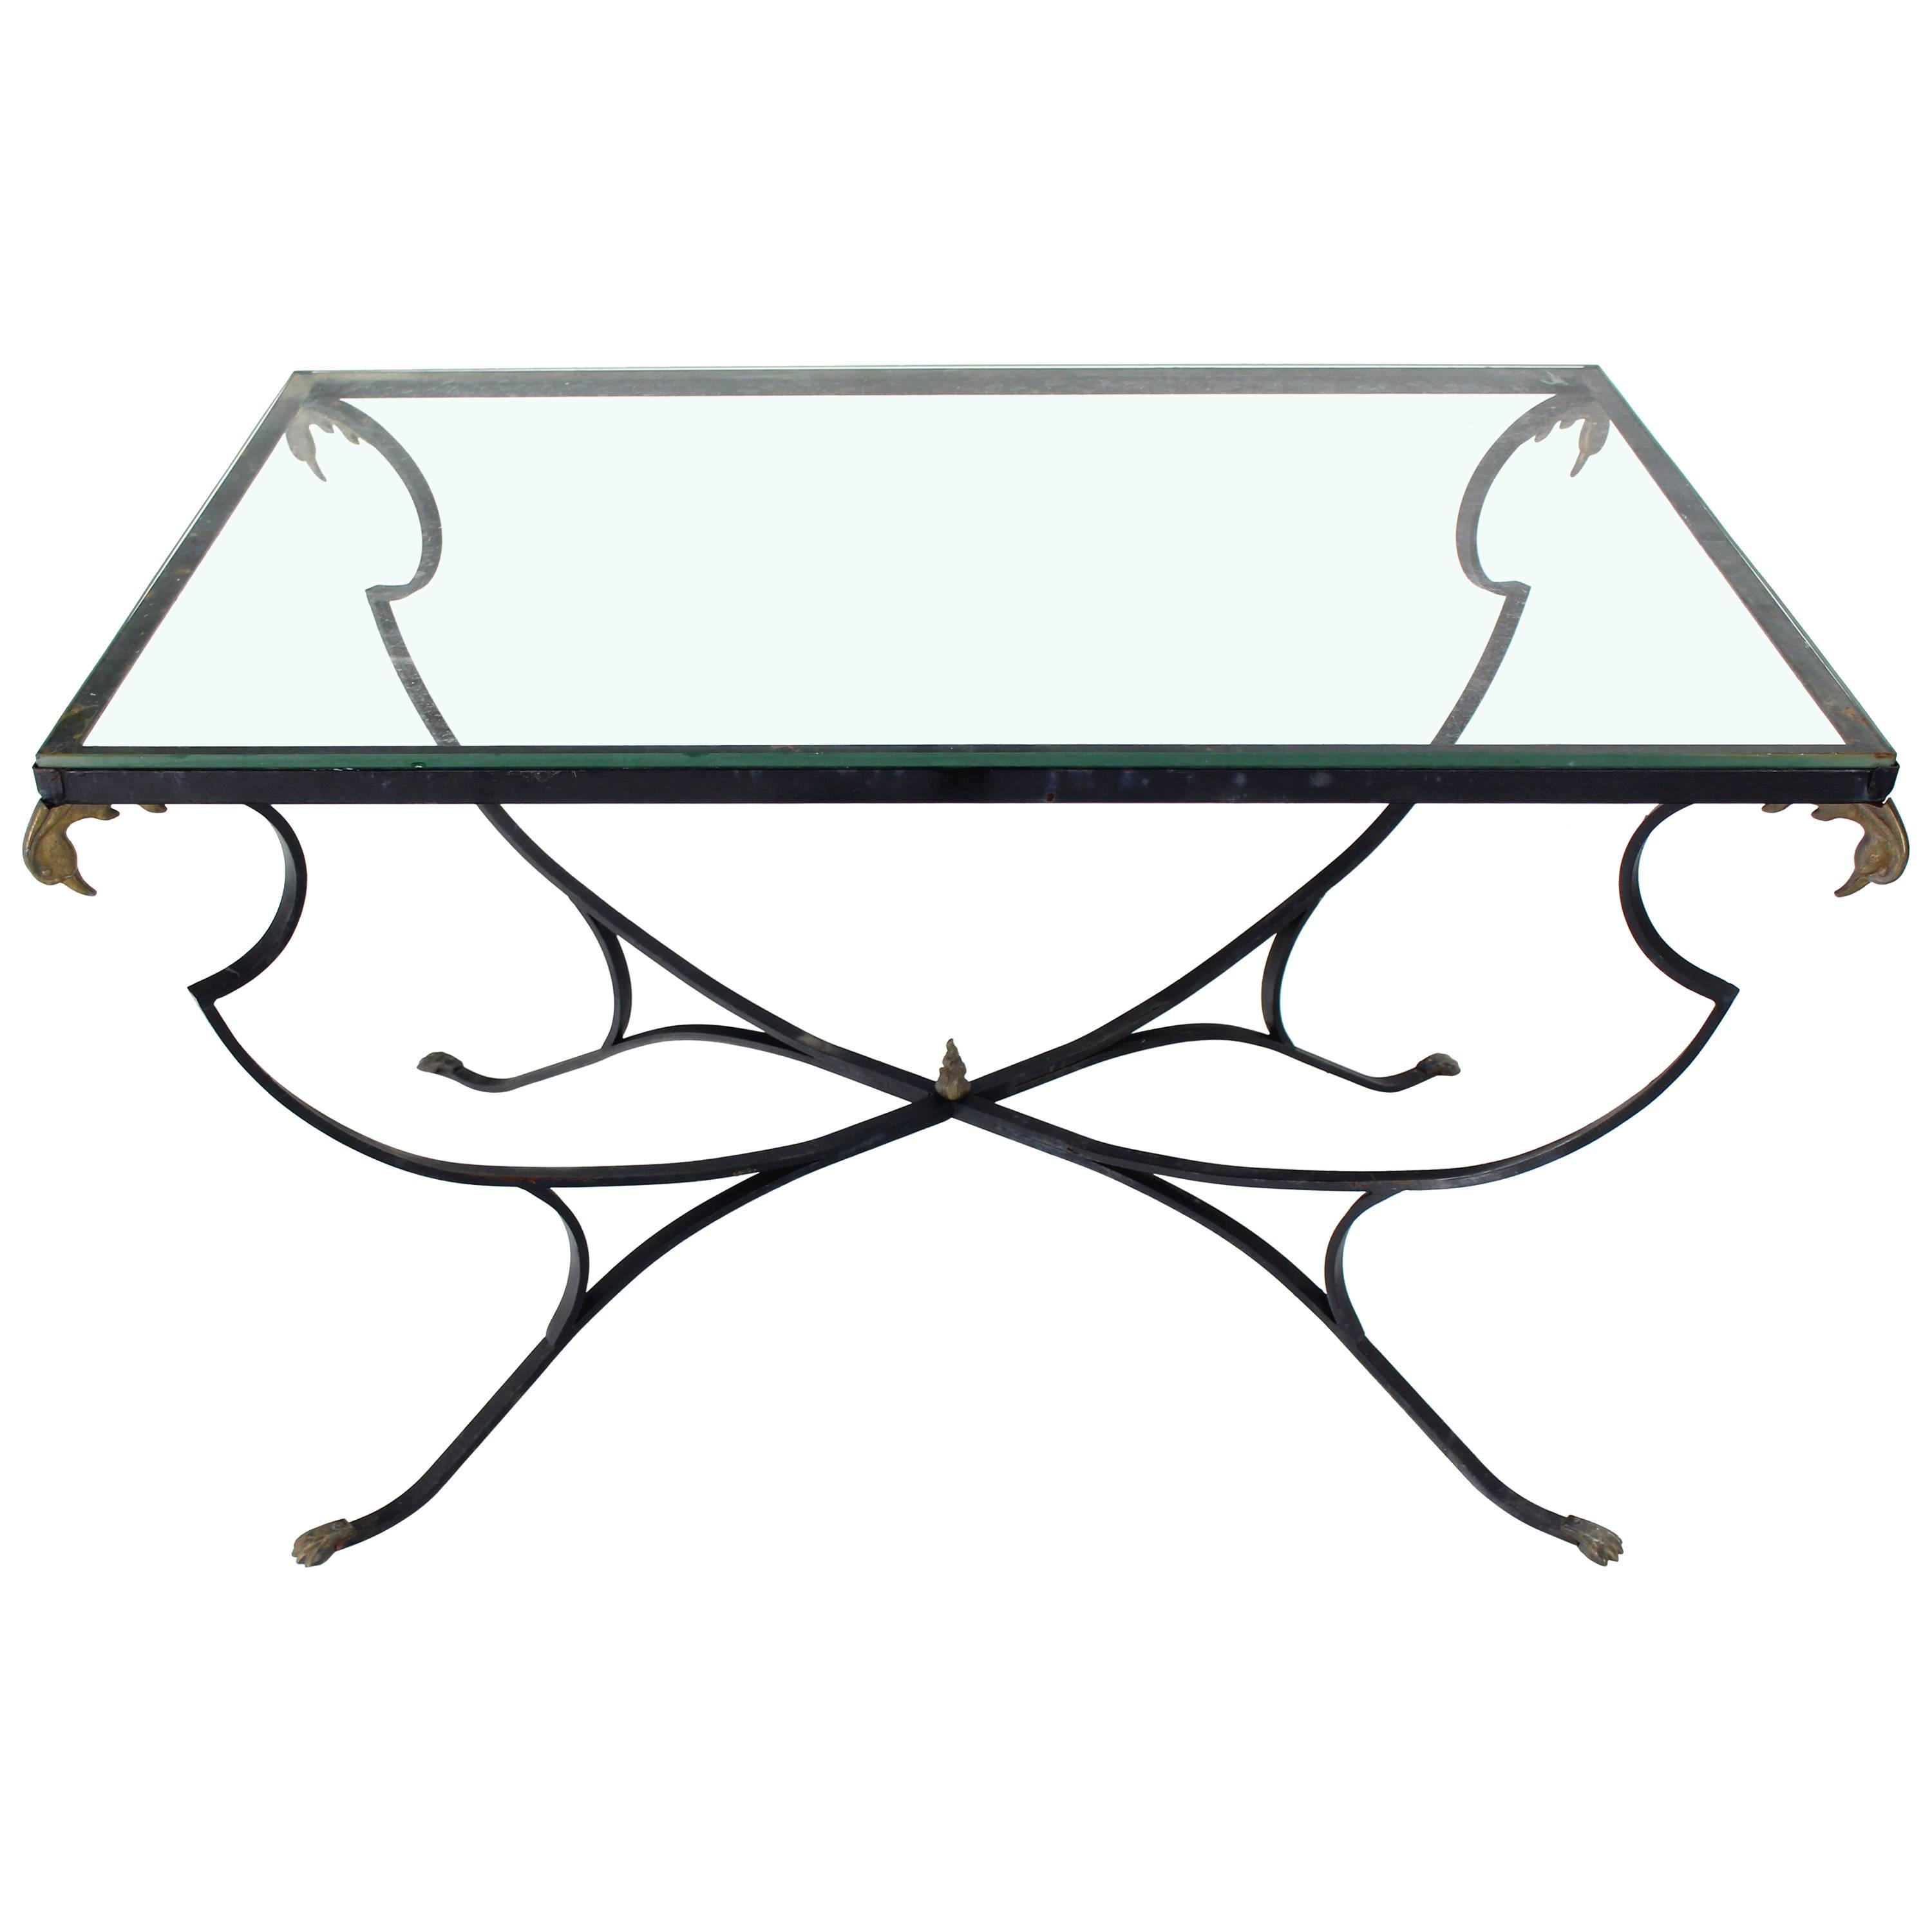 Figural Wrought Iron Brass Bird Tips Glass Top Outdoors Dining Table For Sale